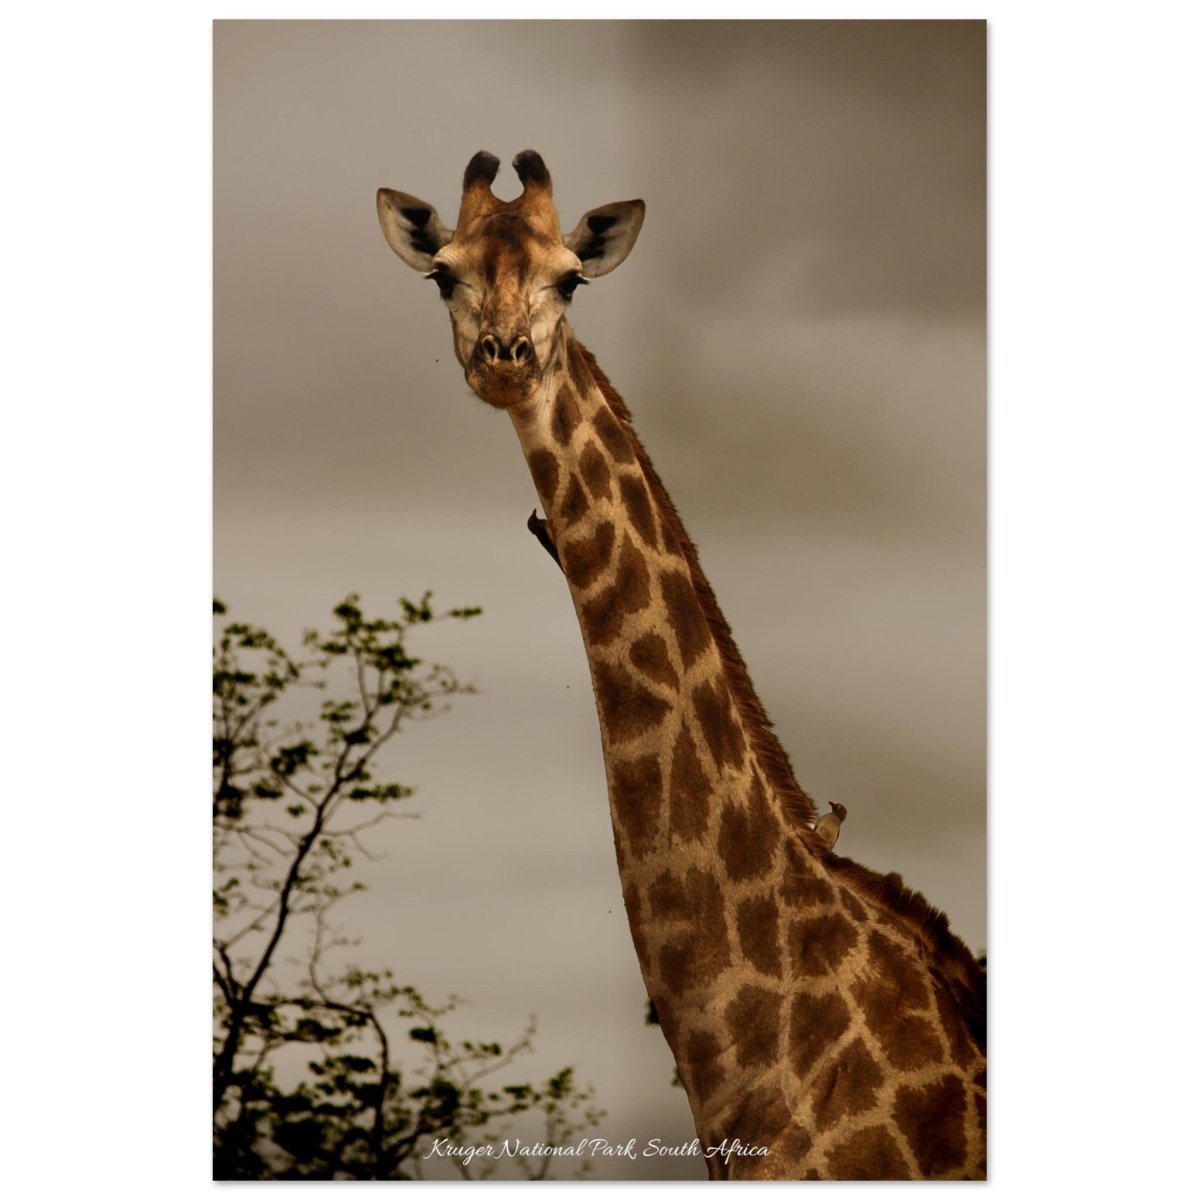 20x30 cm / 8x12″ Birds Perched on Giraffe by Picture This